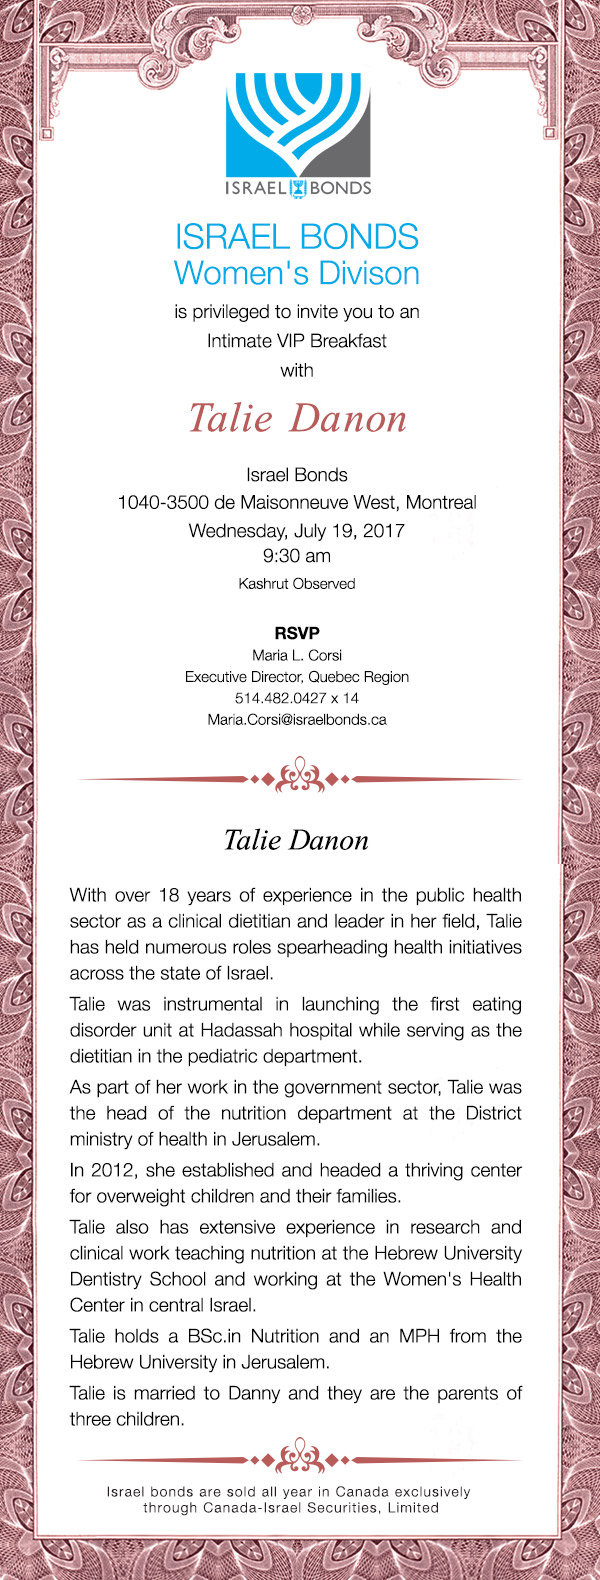 Israel Bonds is privileged to invite you to a Power Breakfast with Talie Danon. Tuesday July 18, 2017 9:30 am